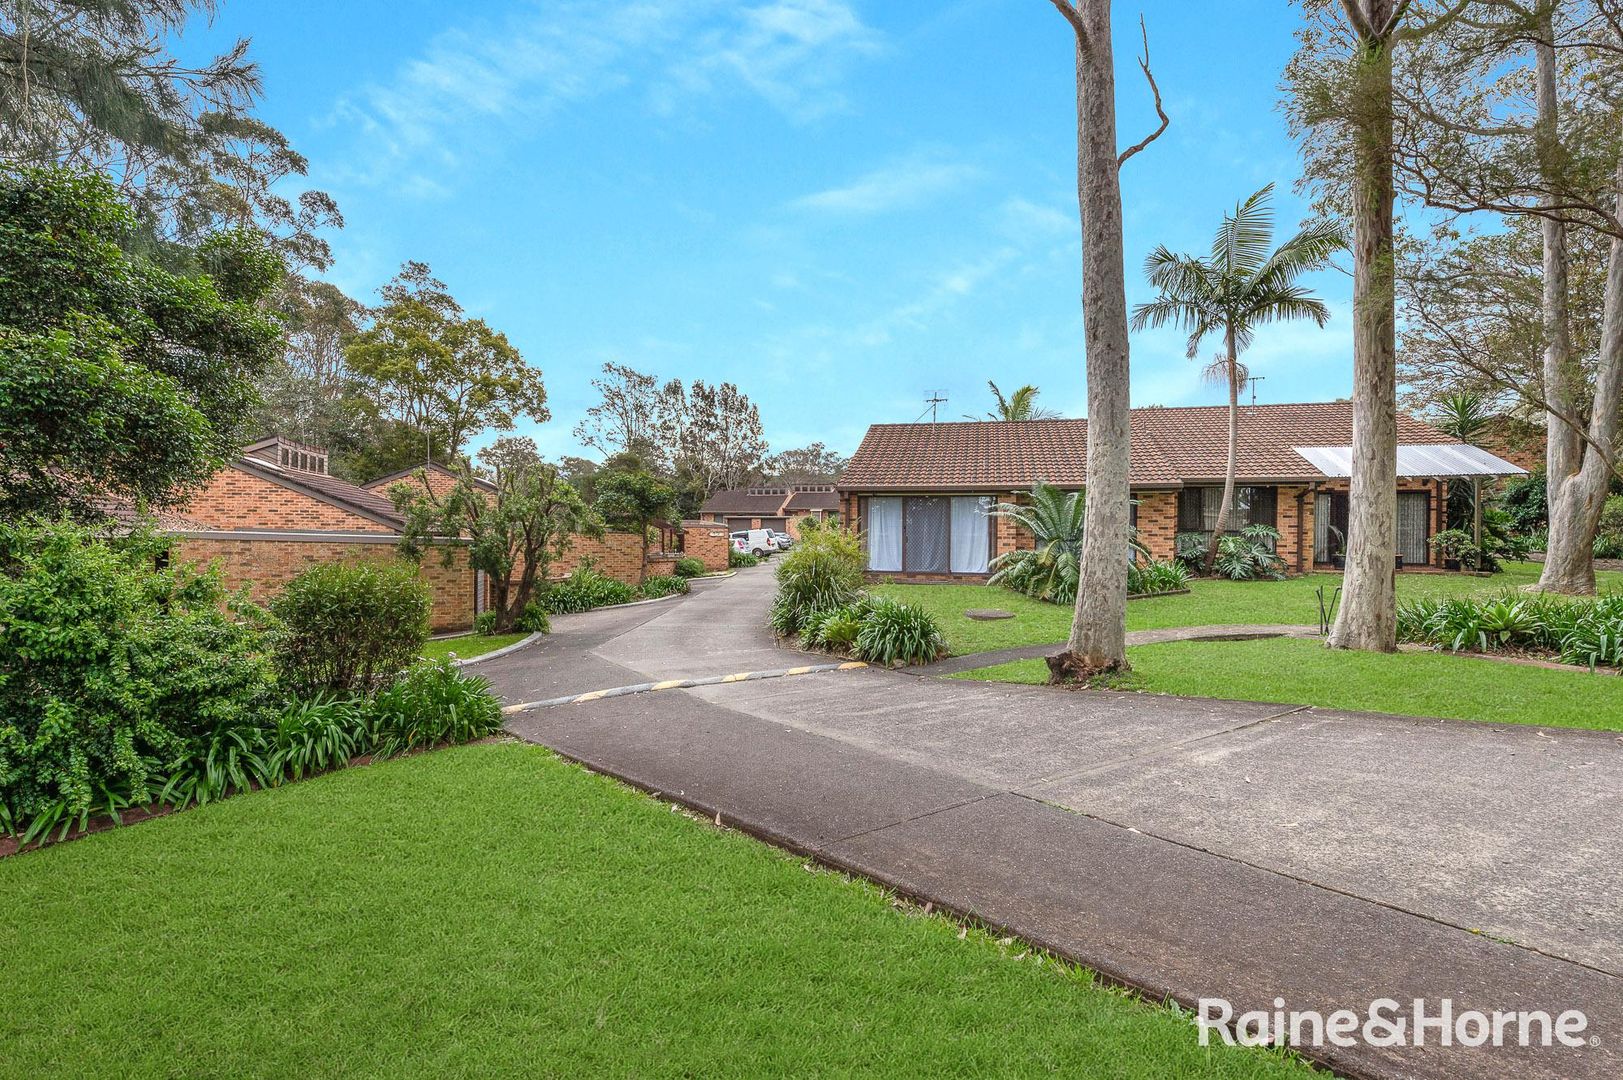 15/27 Bowada Street, Bomaderry NSW 2541